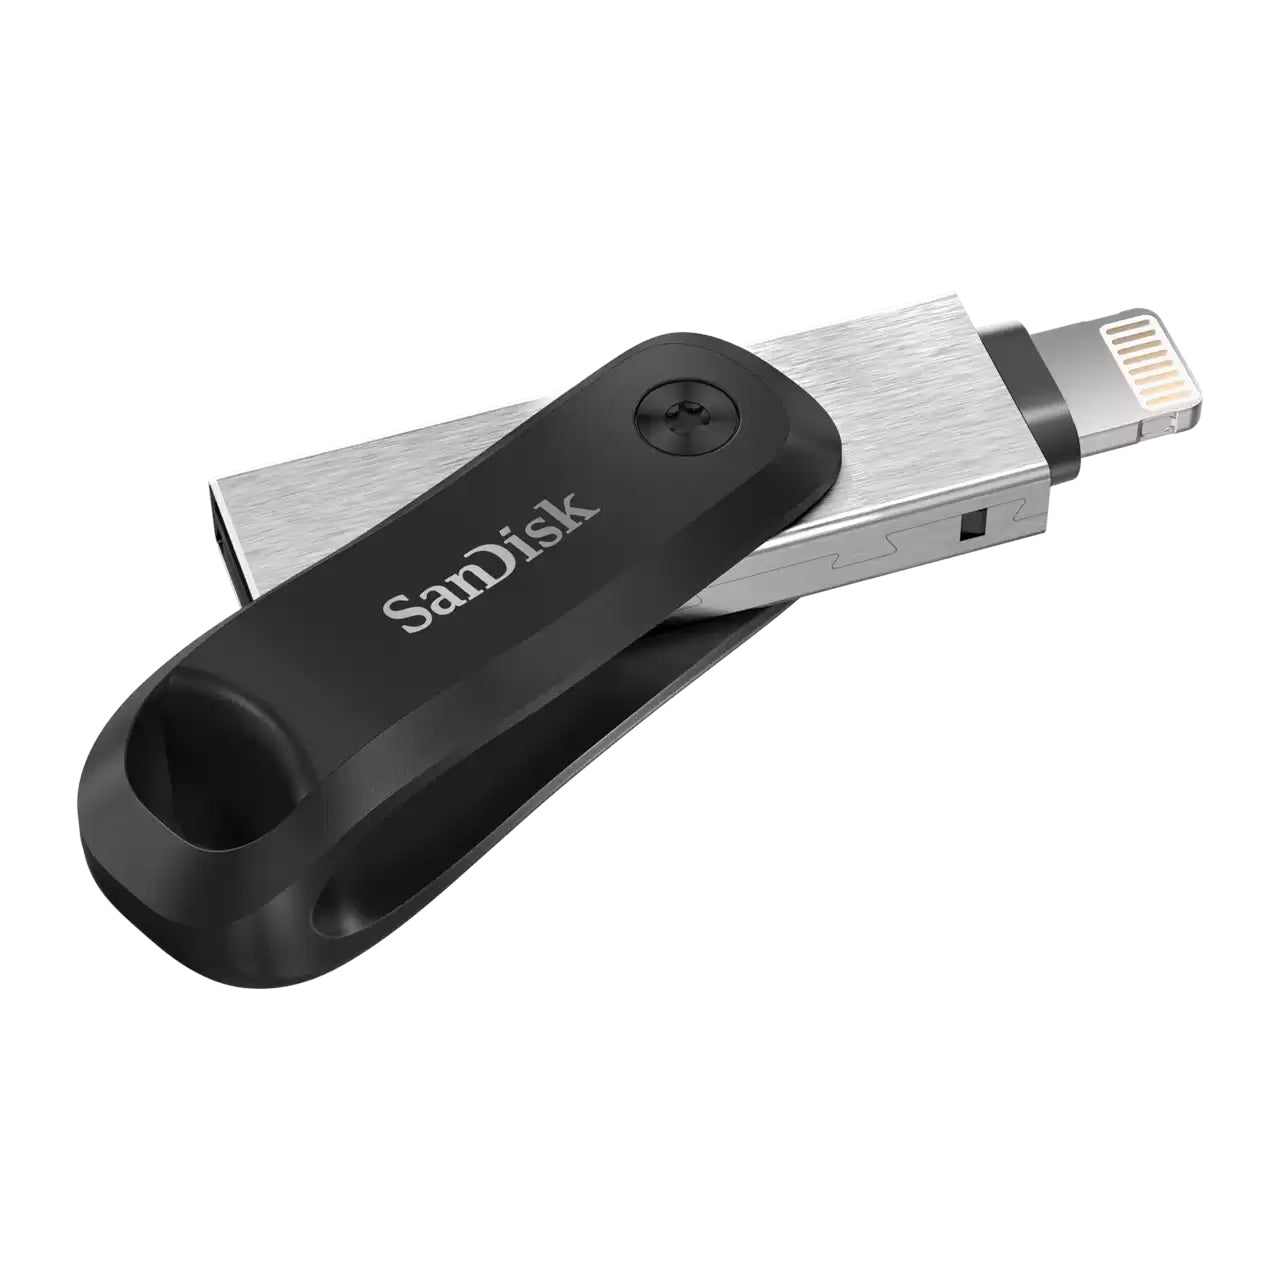 SanDisk iXpand OTG Lightning to USB 3.0 Flash Drive Go with 90MB/s Write Speed for iOS, PC, and Mac (64GB, 128GB)